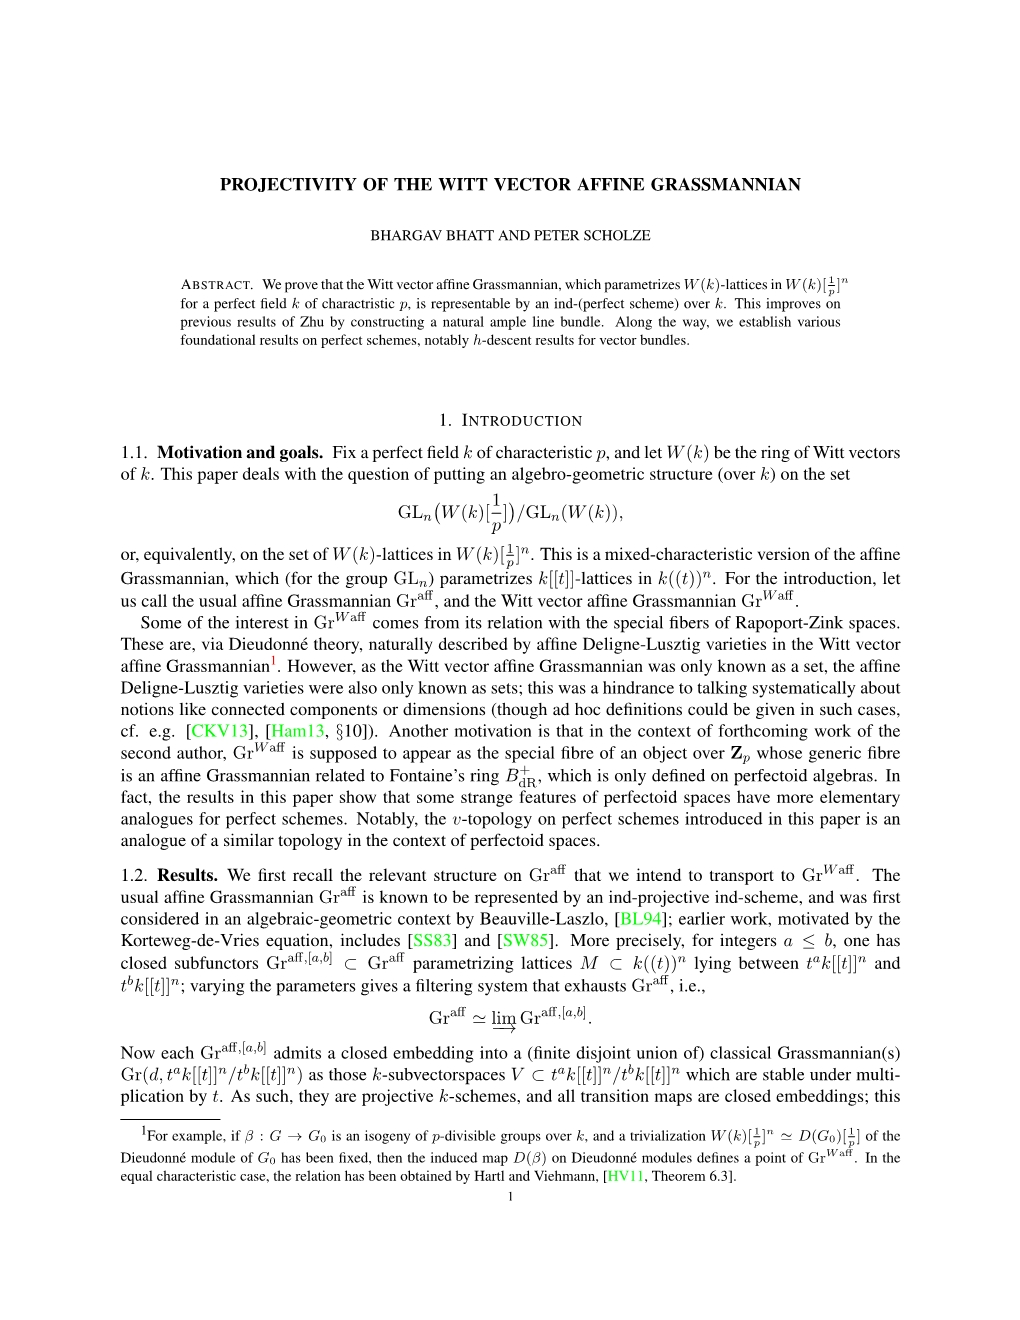 PROJECTIVITY of the WITT VECTOR AFFINE GRASSMANNIAN 1.1. Motivation and Goals. Fix a Perfect Field K of Characteristic P, and Le